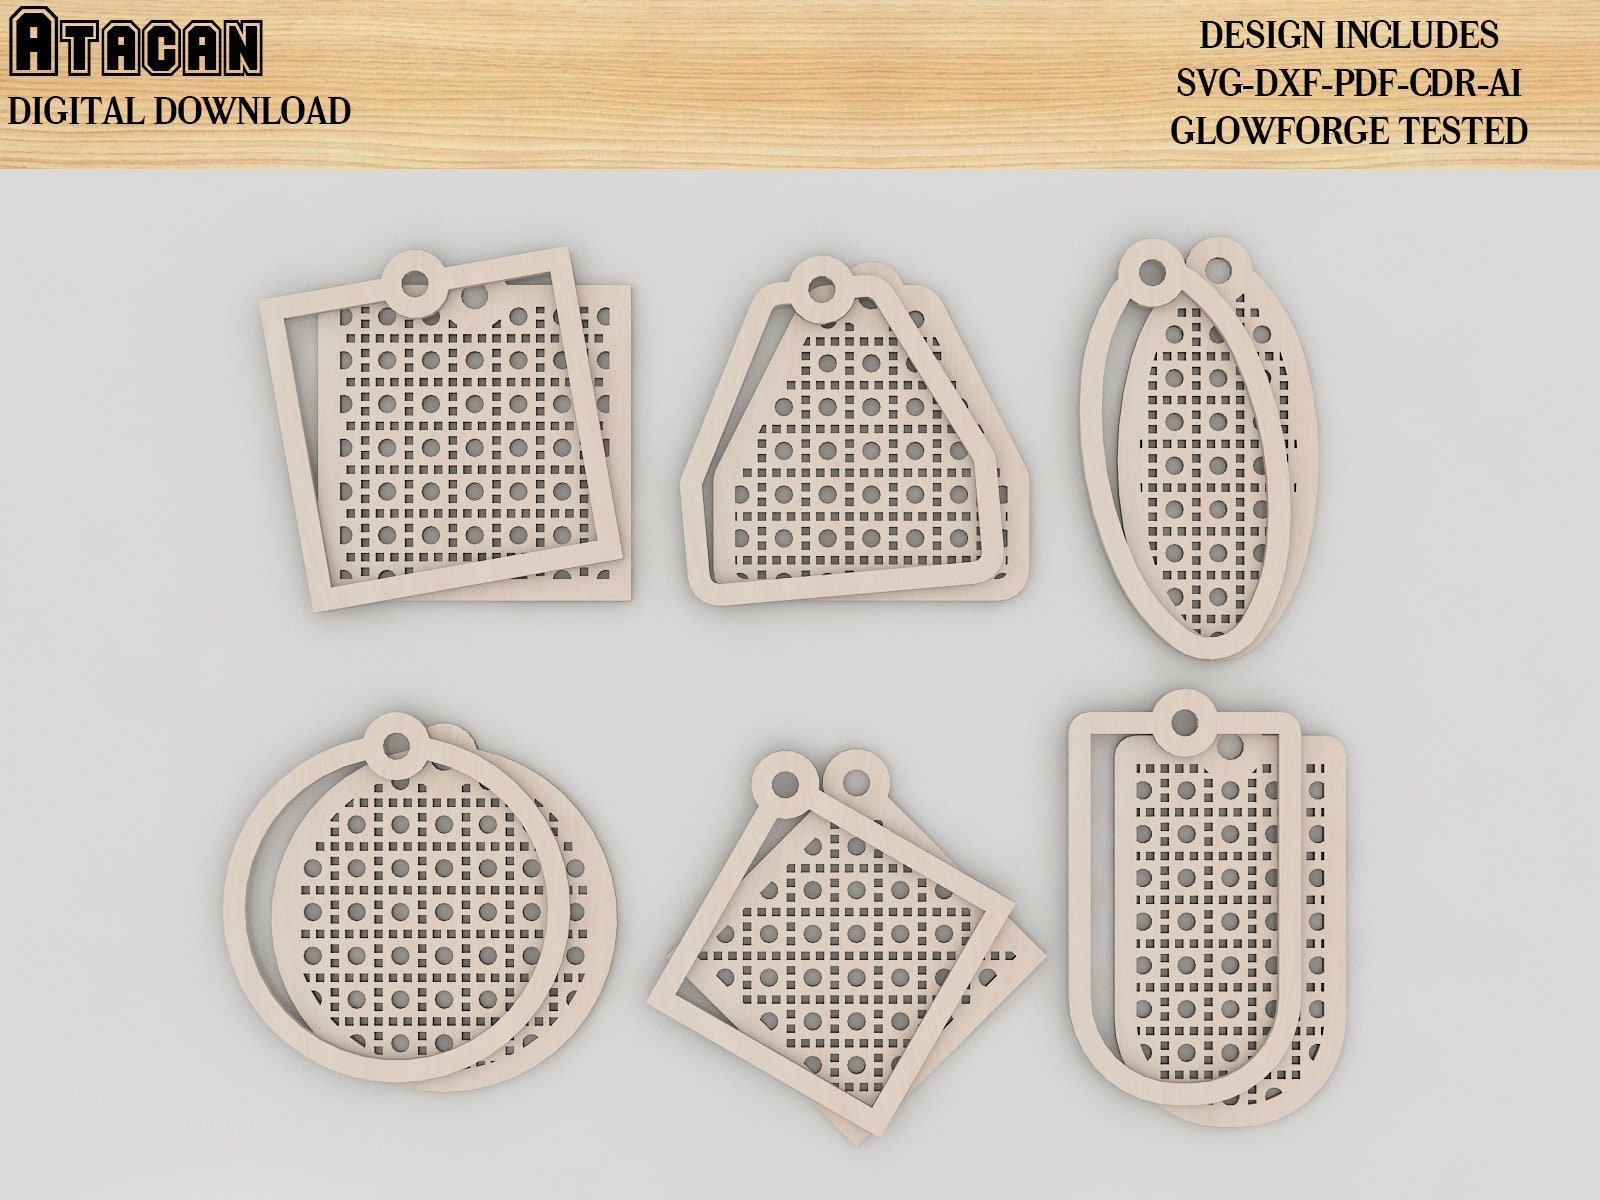 Rattan cane Keychain Designs / Rattan Patterned Keychain Laser cut Svg files / Glowforge Vector files 407